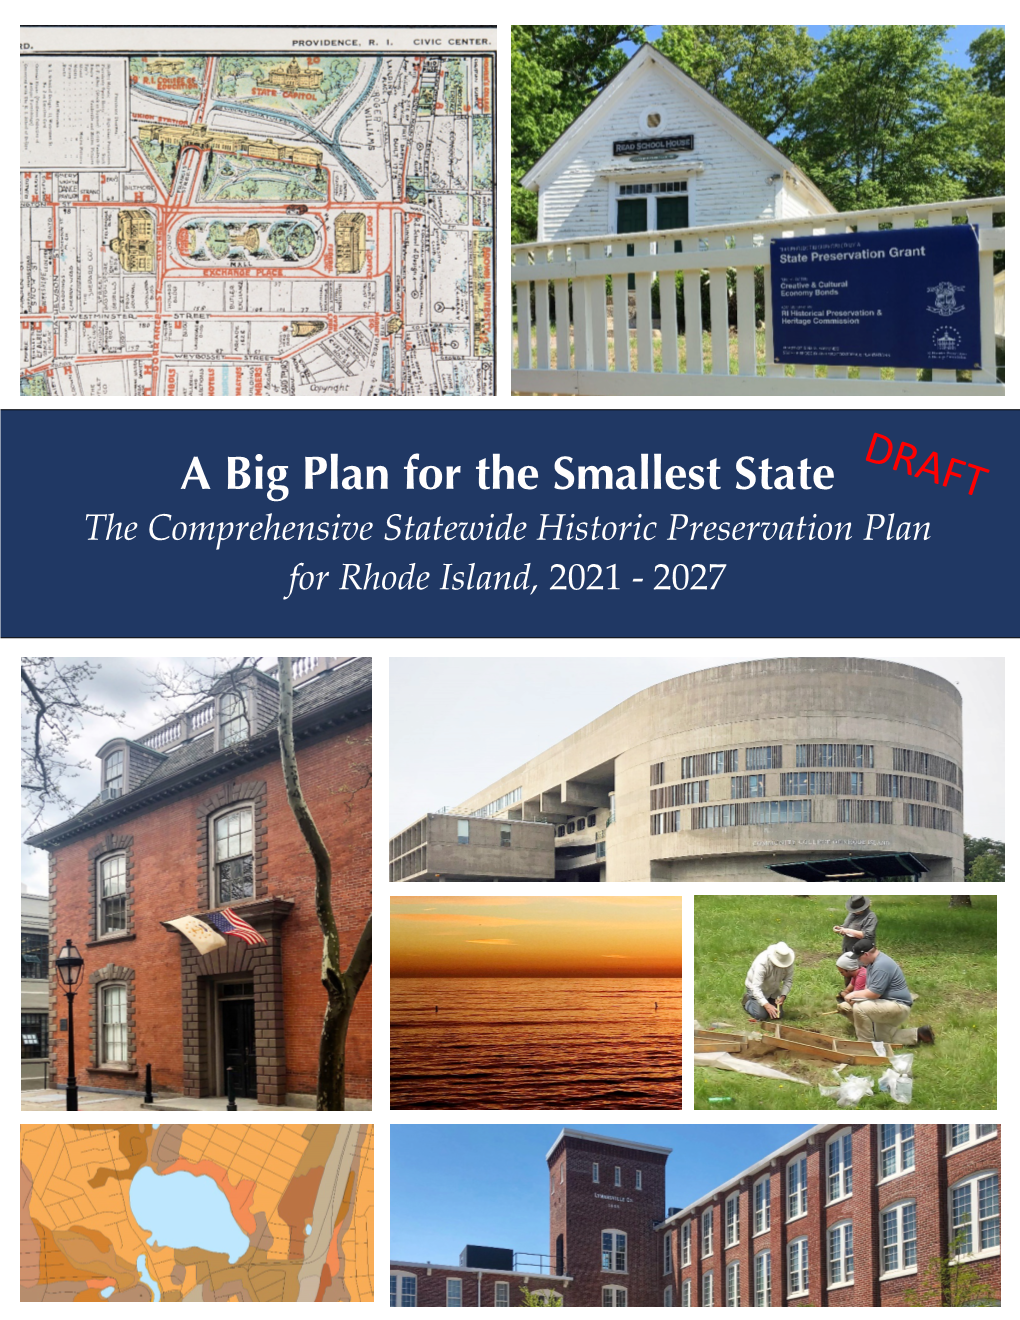 The Comprehensive Statewide Historic Preservation Plan for Rhode Island, 2021-2027